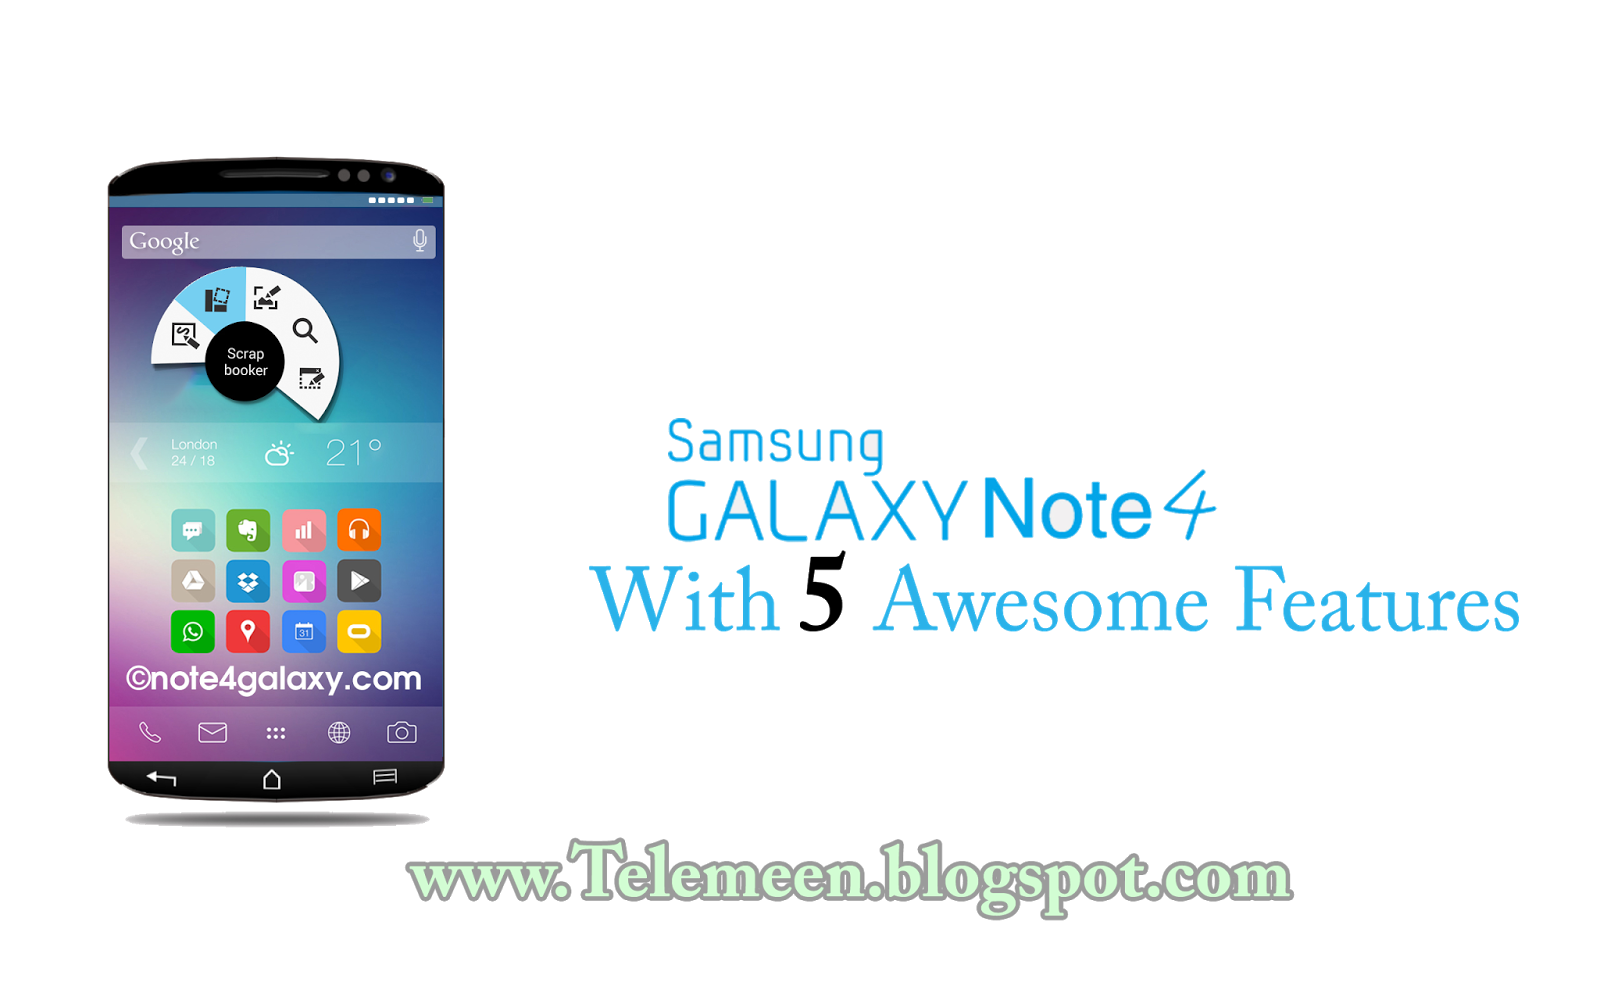 Galaxy note 4 features